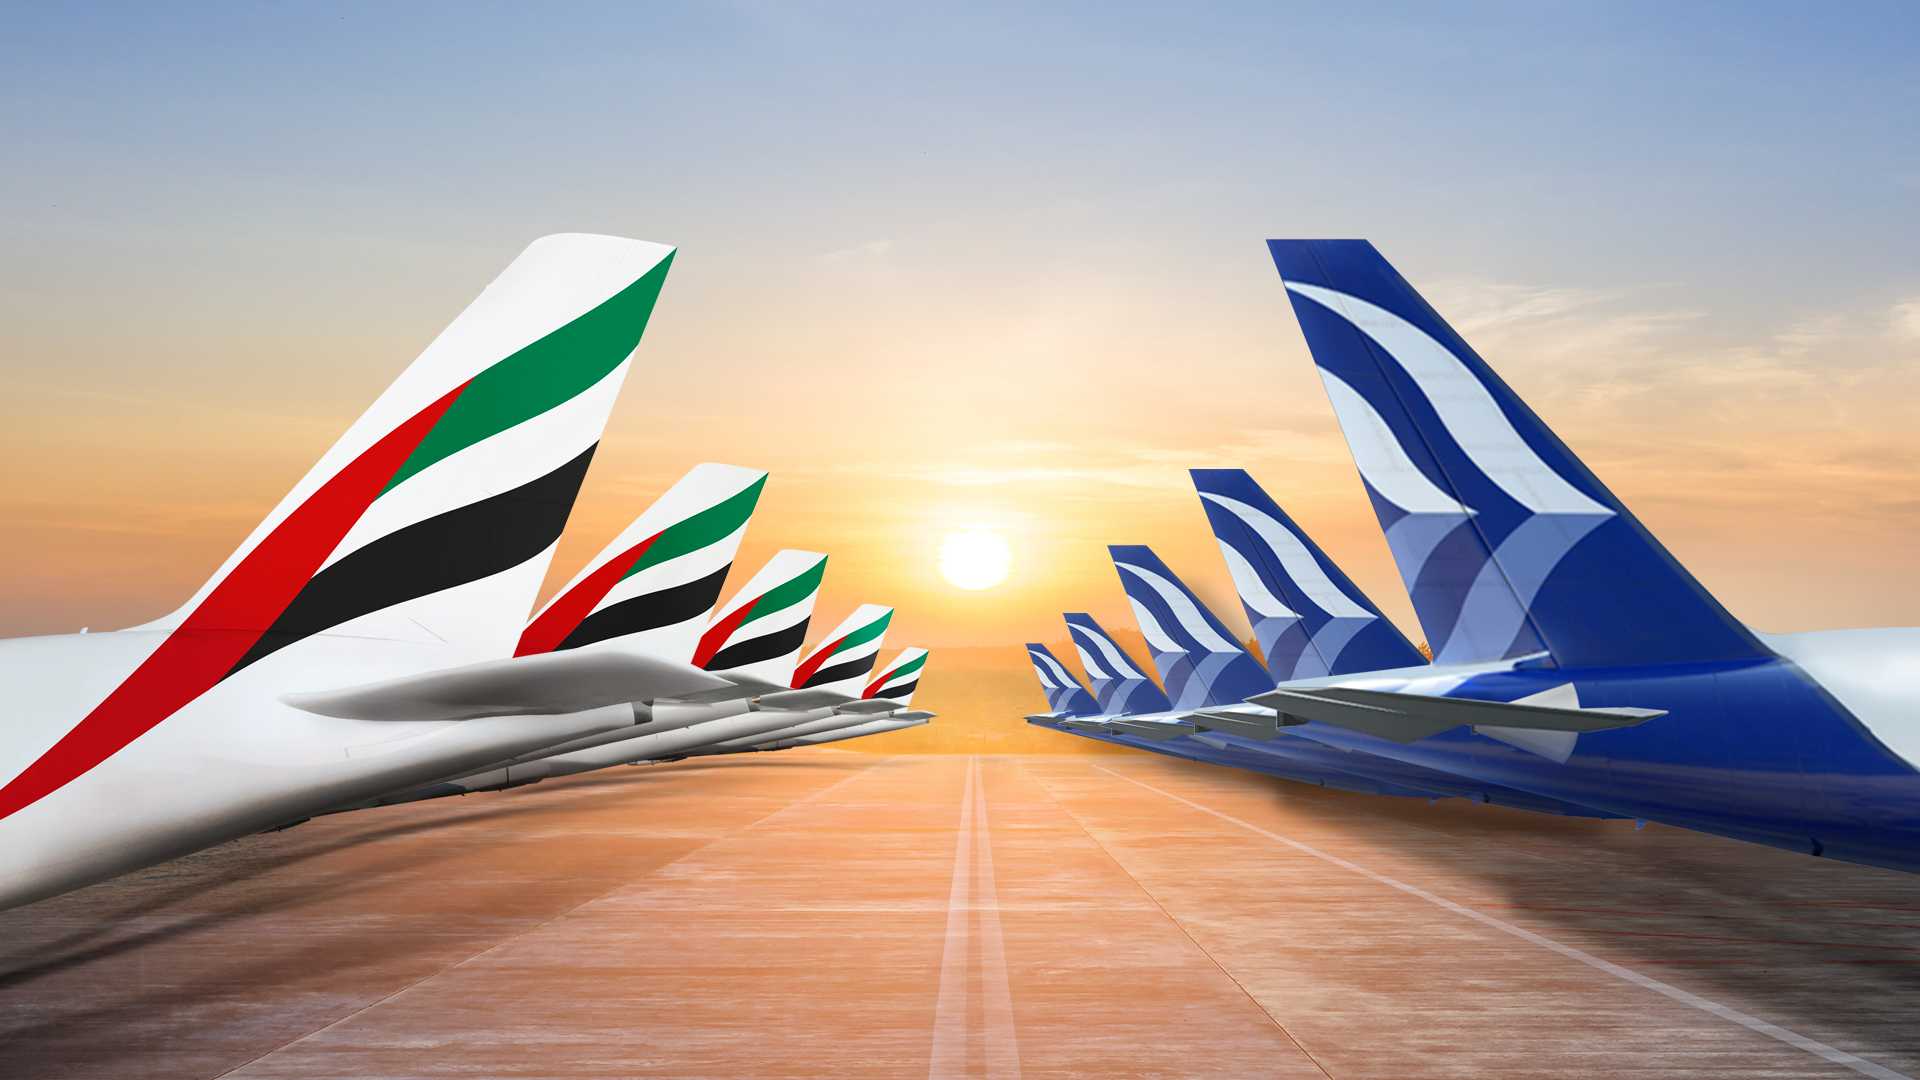 Aegean partners with Emirates for codeshare flights